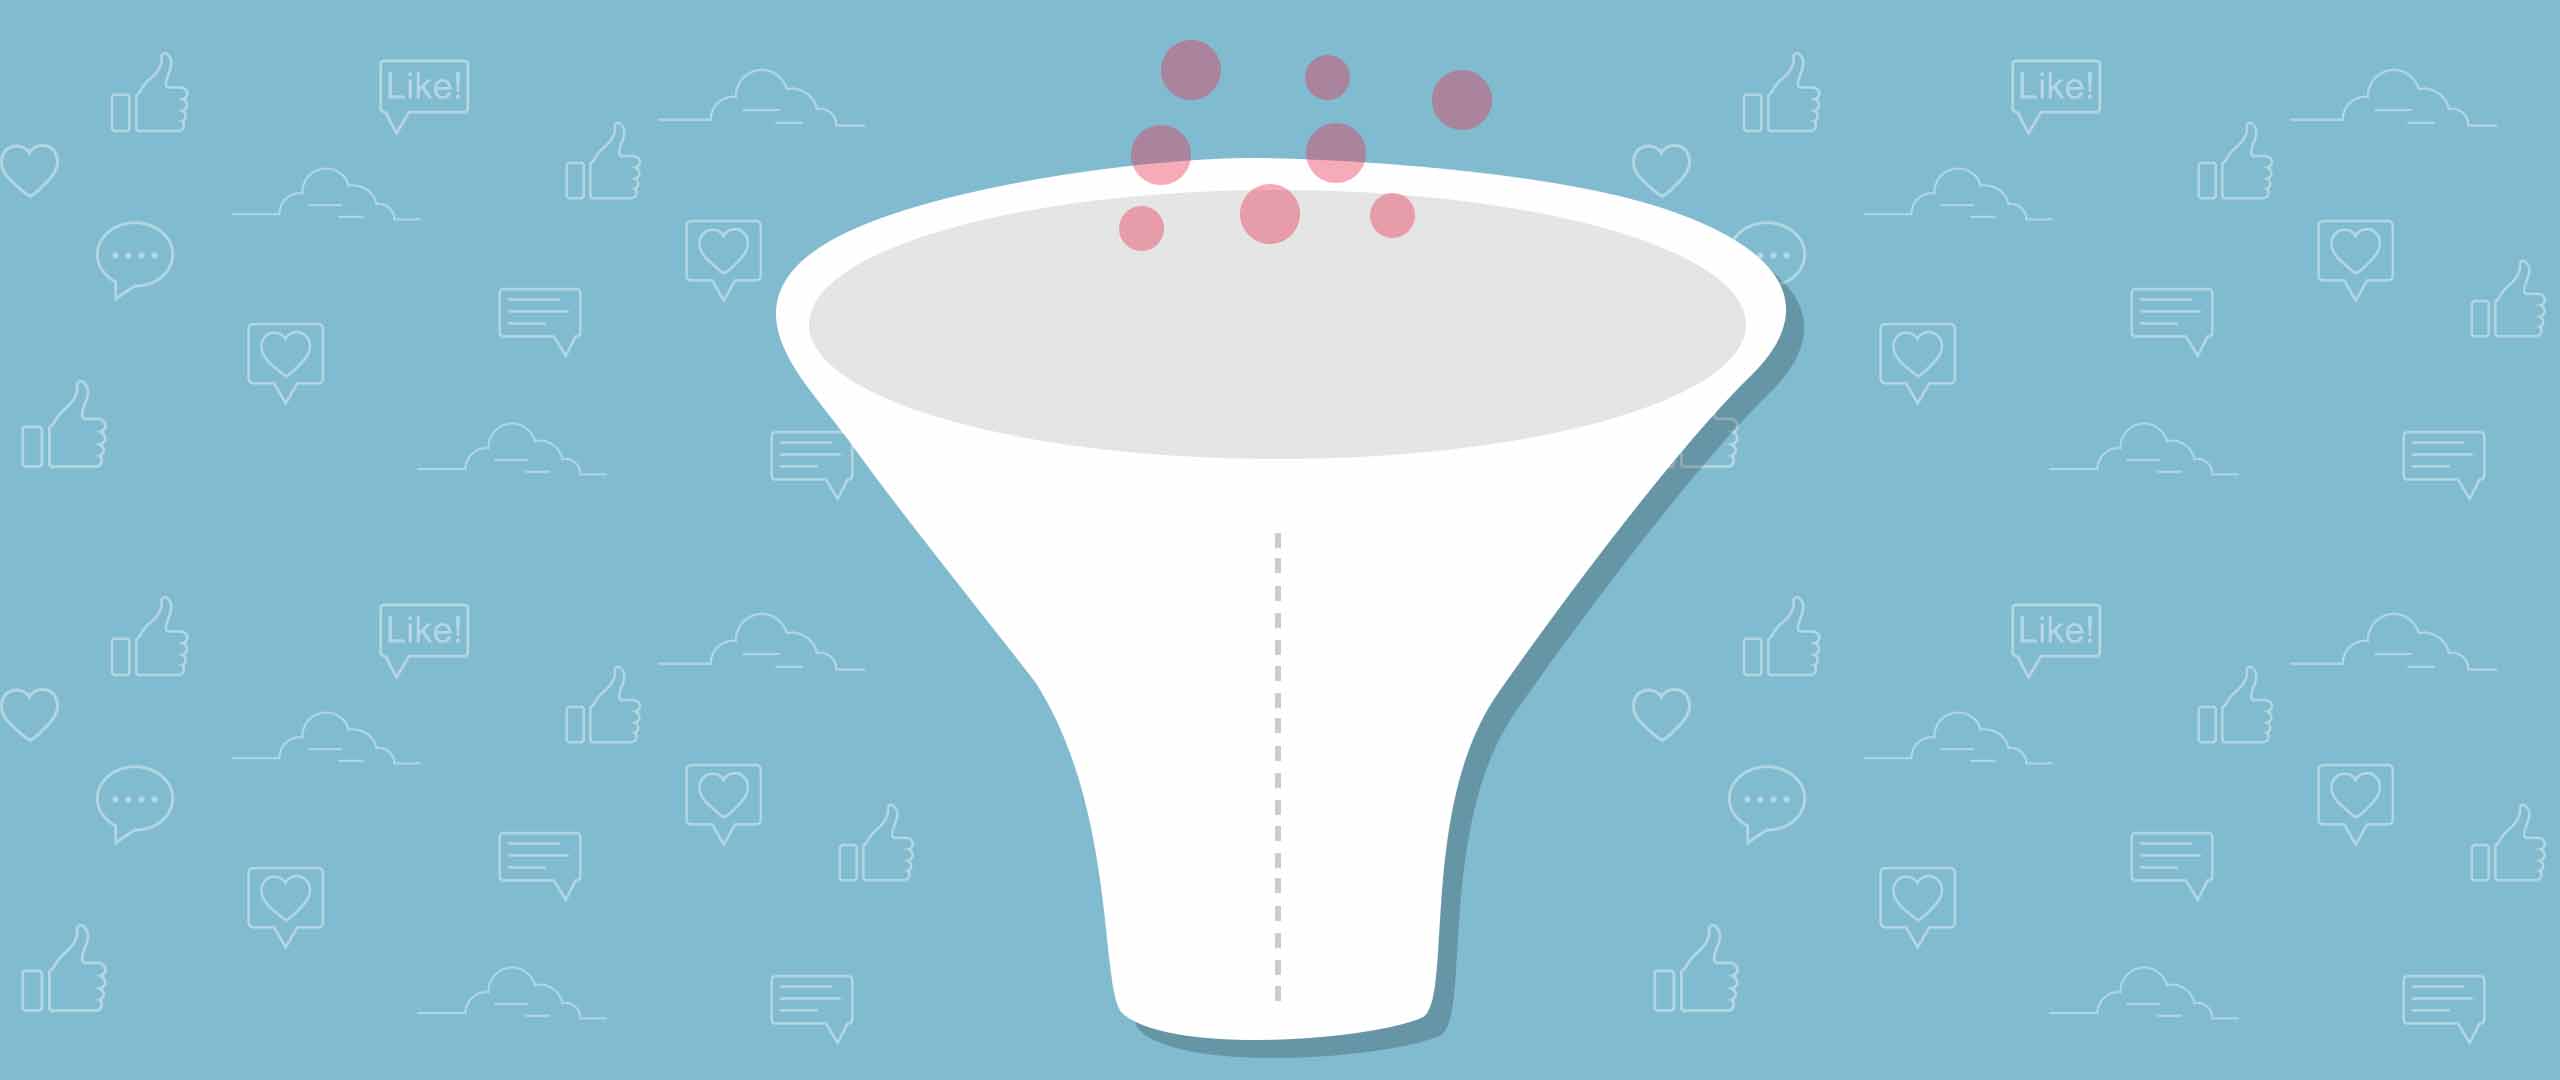 Marketing Funnel Explained in Simple Terms [Infographic]